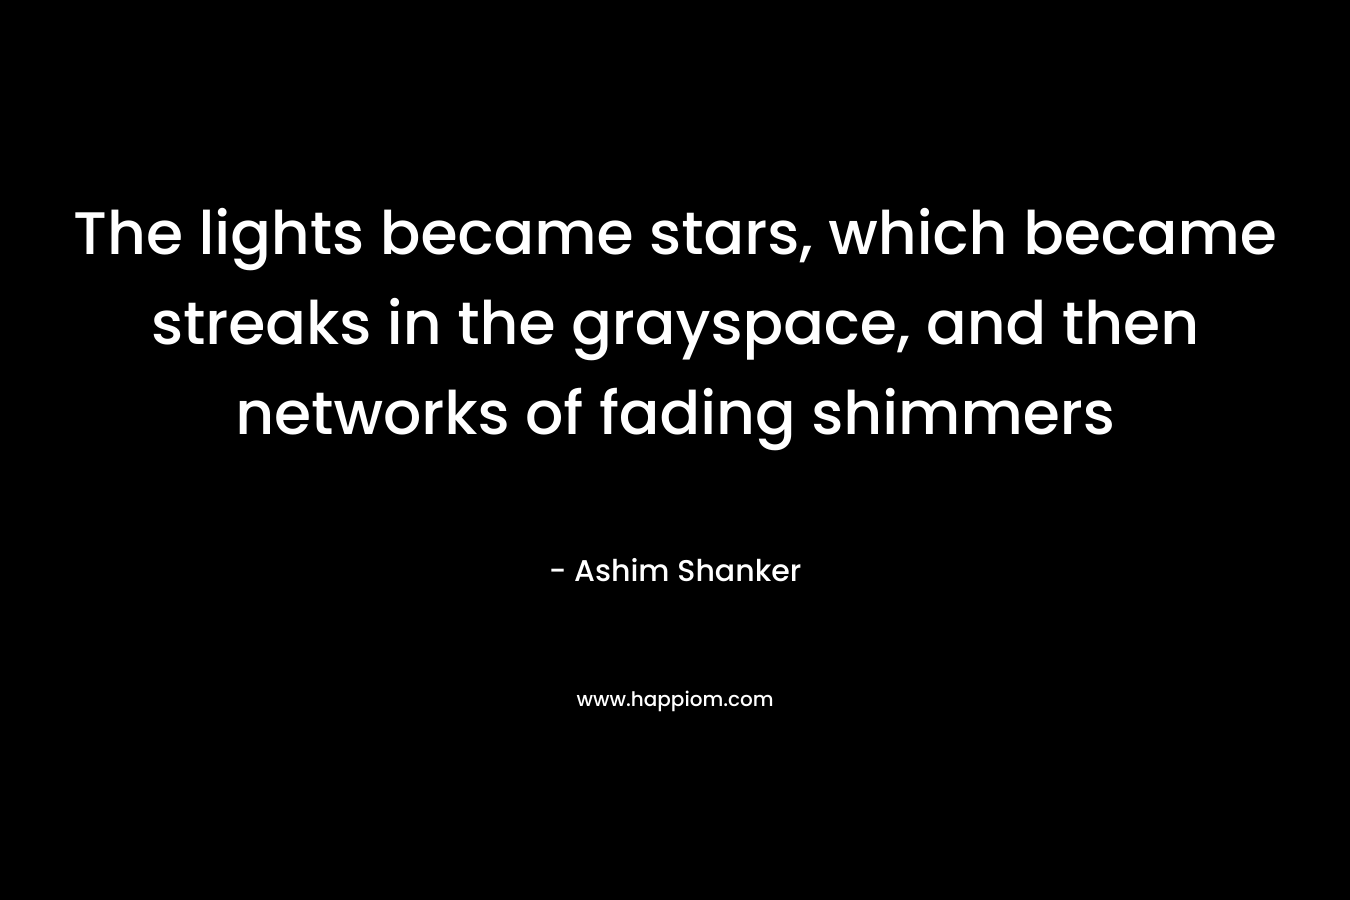 The lights became stars, which became streaks in the grayspace, and then networks of fading shimmers